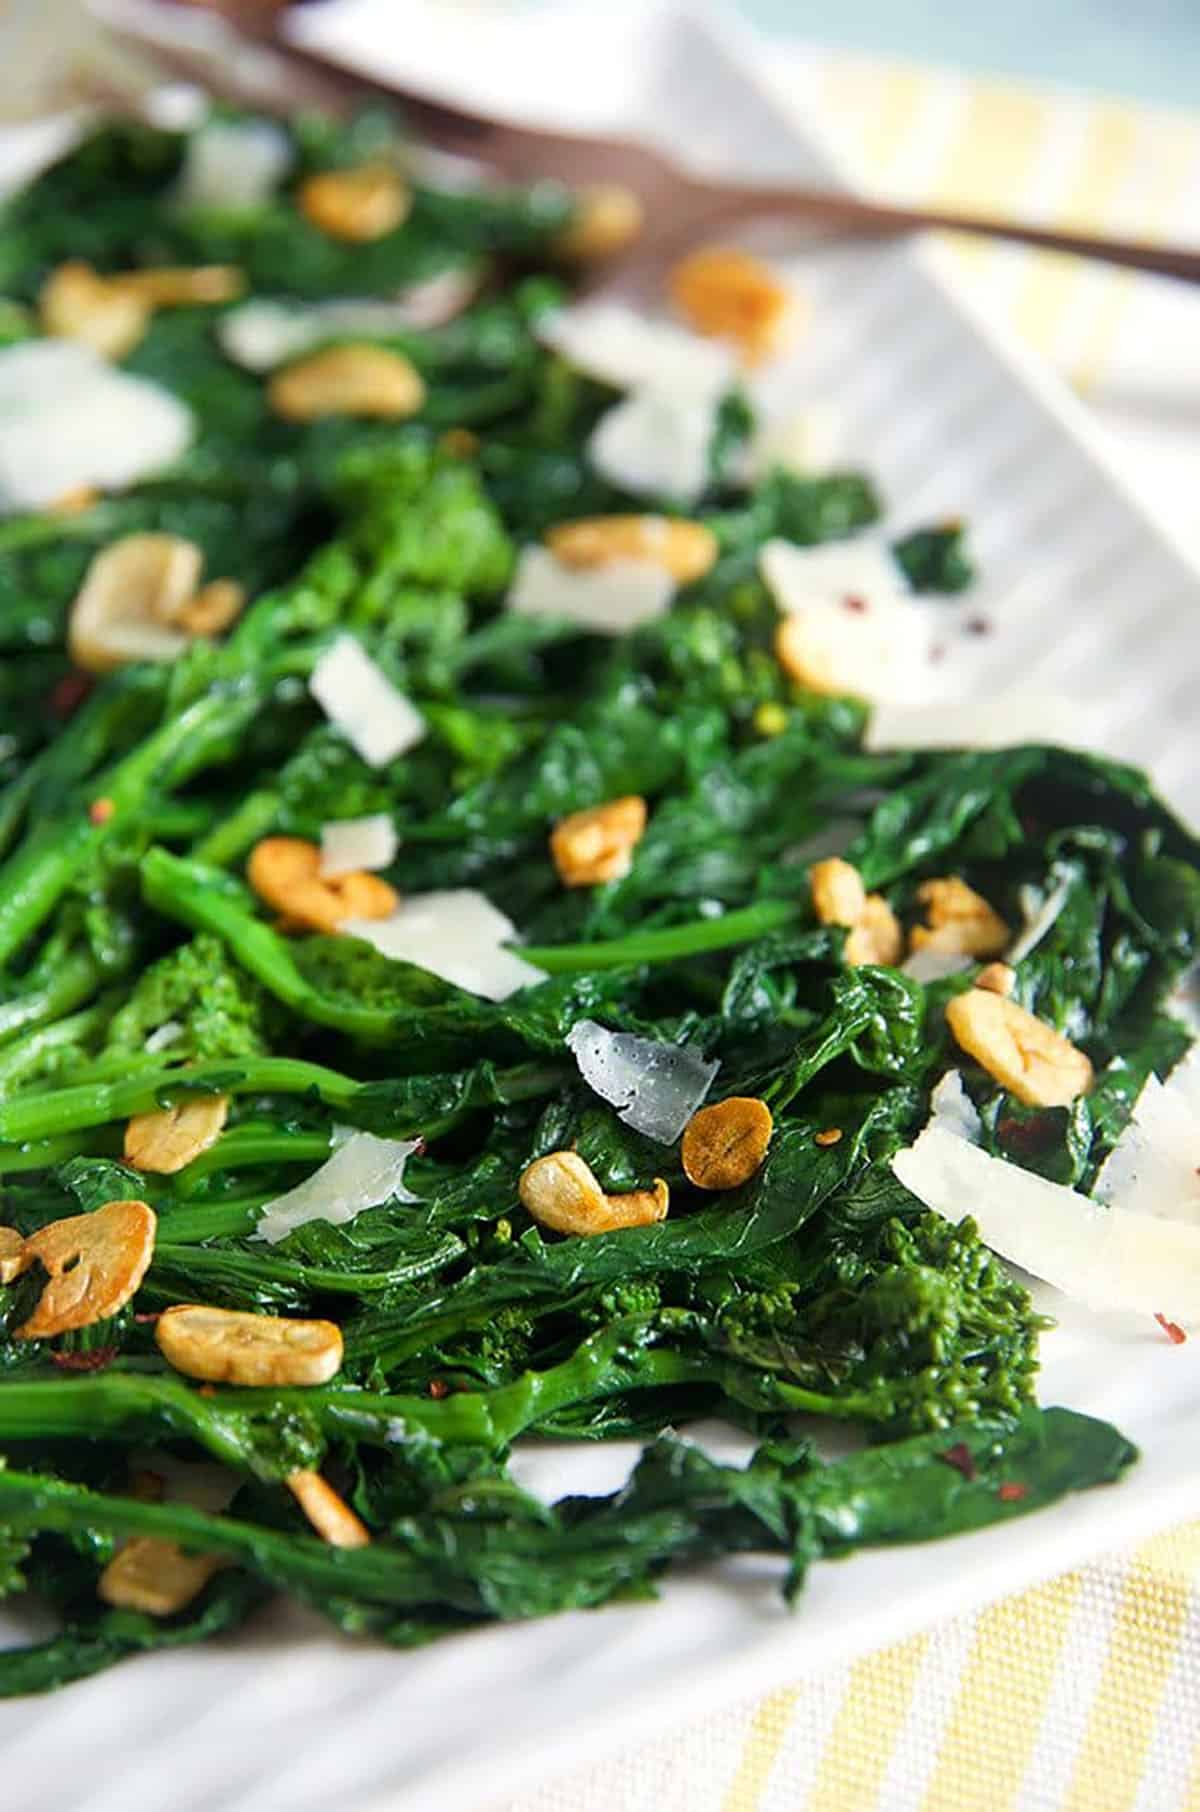 Broccoli Rabe with garlic on a white platter.